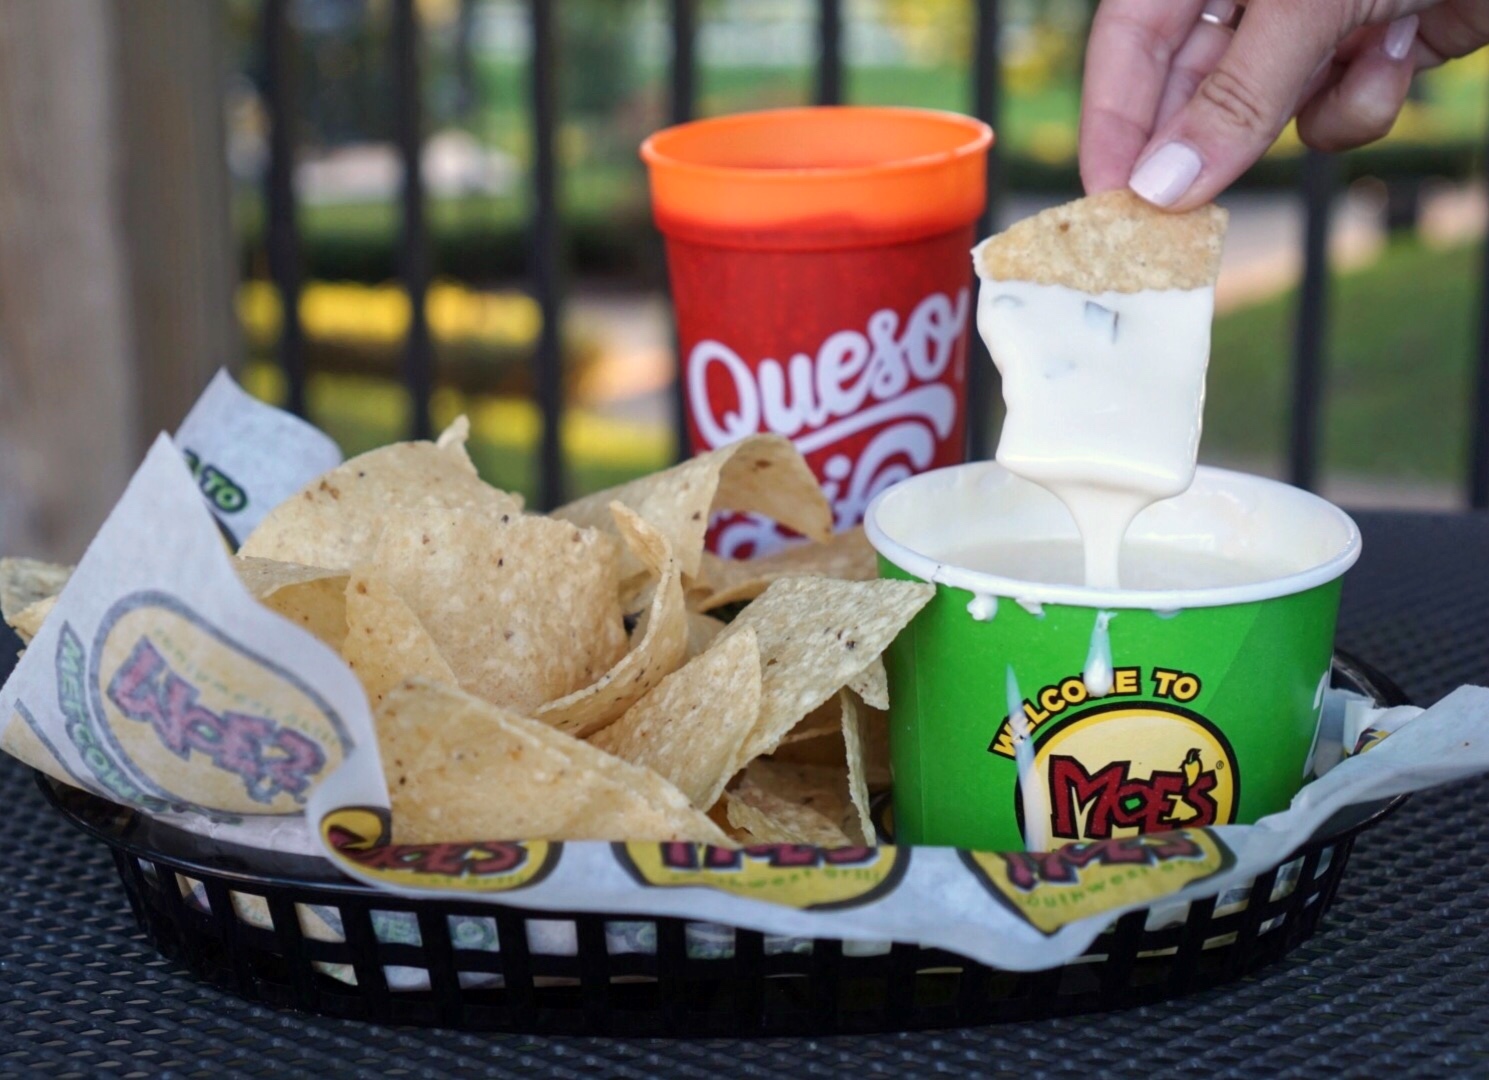 Get Your Free Queso at Moes on Free Queso Day